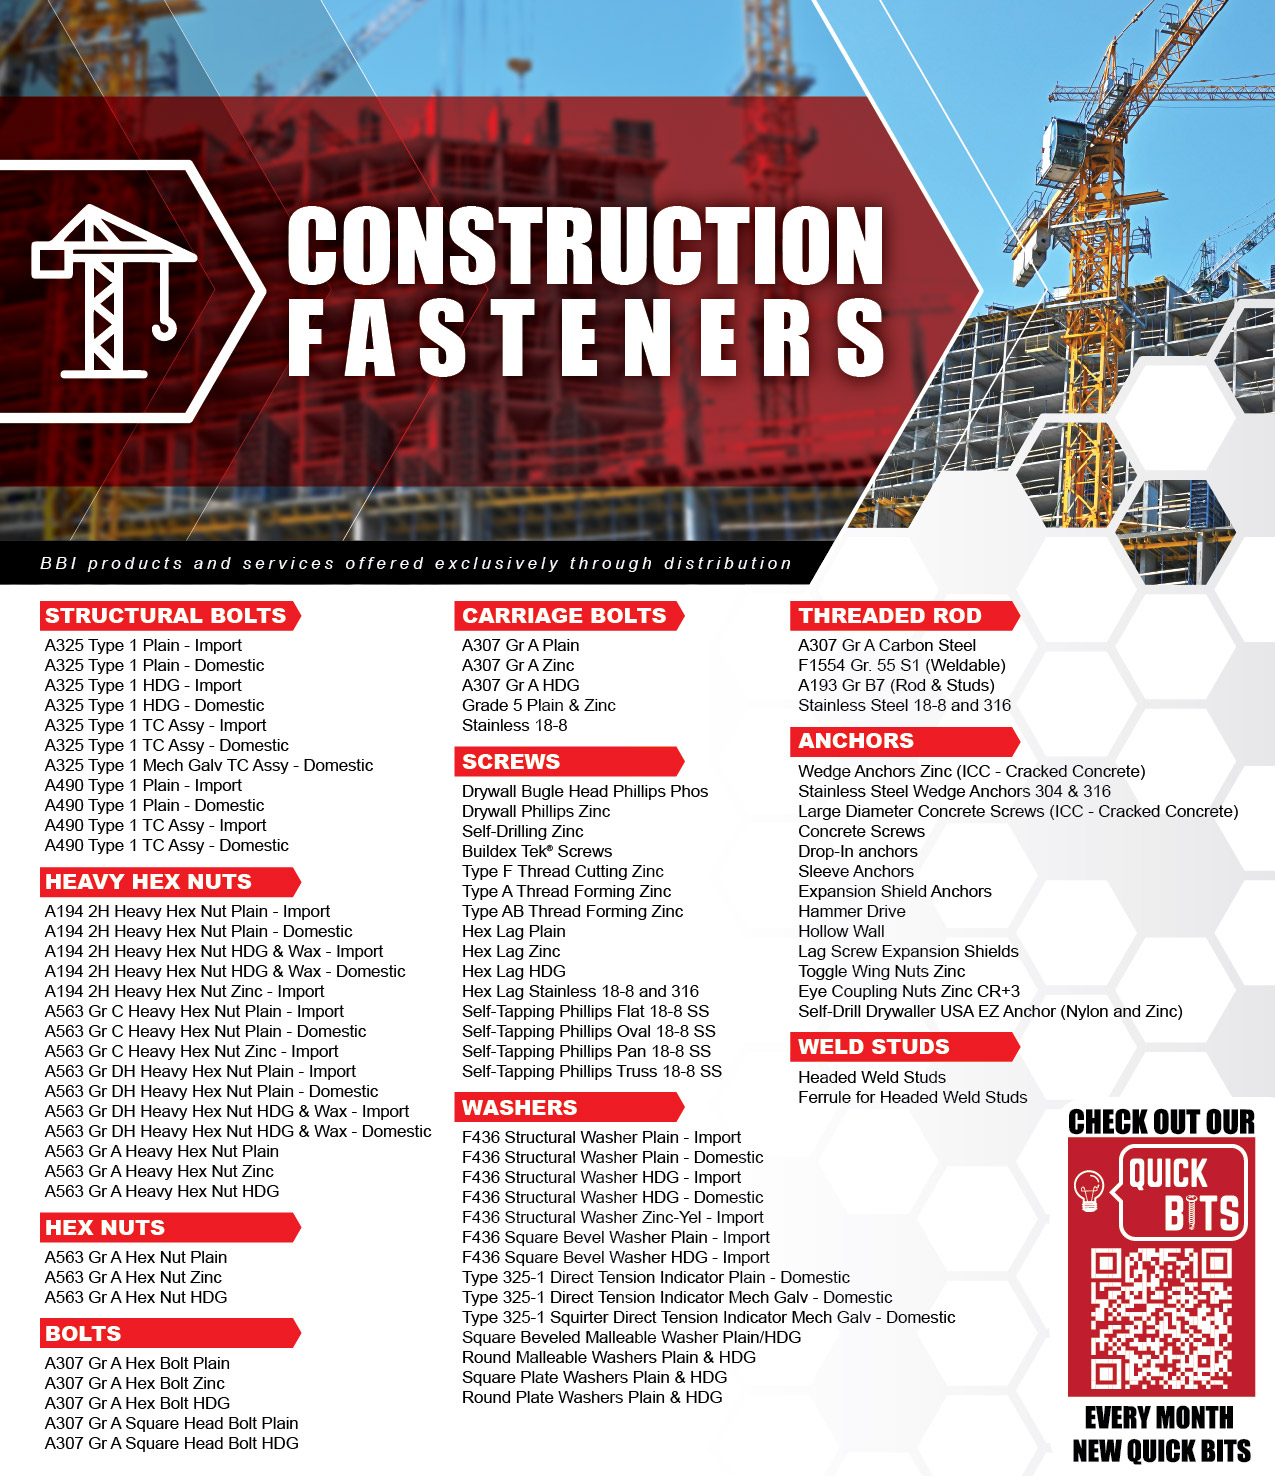 BBI - YOUR ONE STOP STAINLESS & NON-FERROUS FASTENER SOURCE